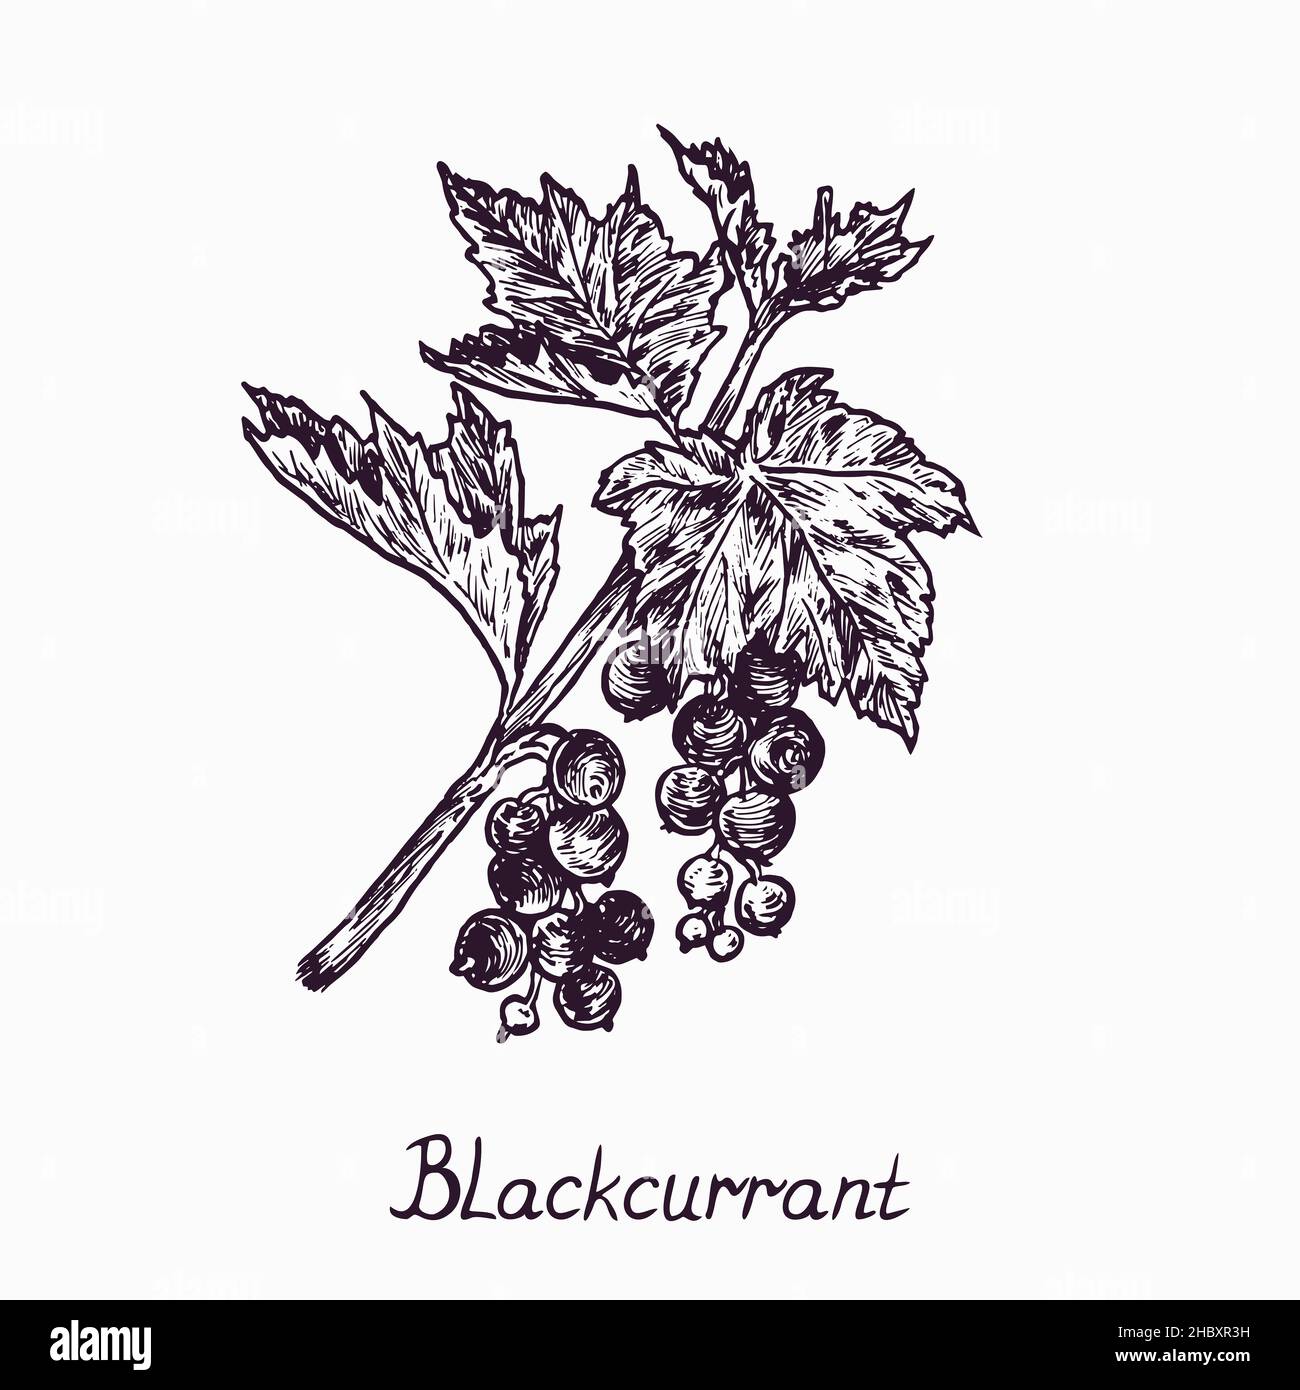 Blackcurrant branch with berries and leaves, simple doodle drawing with inscription, gravure style Stock Photo